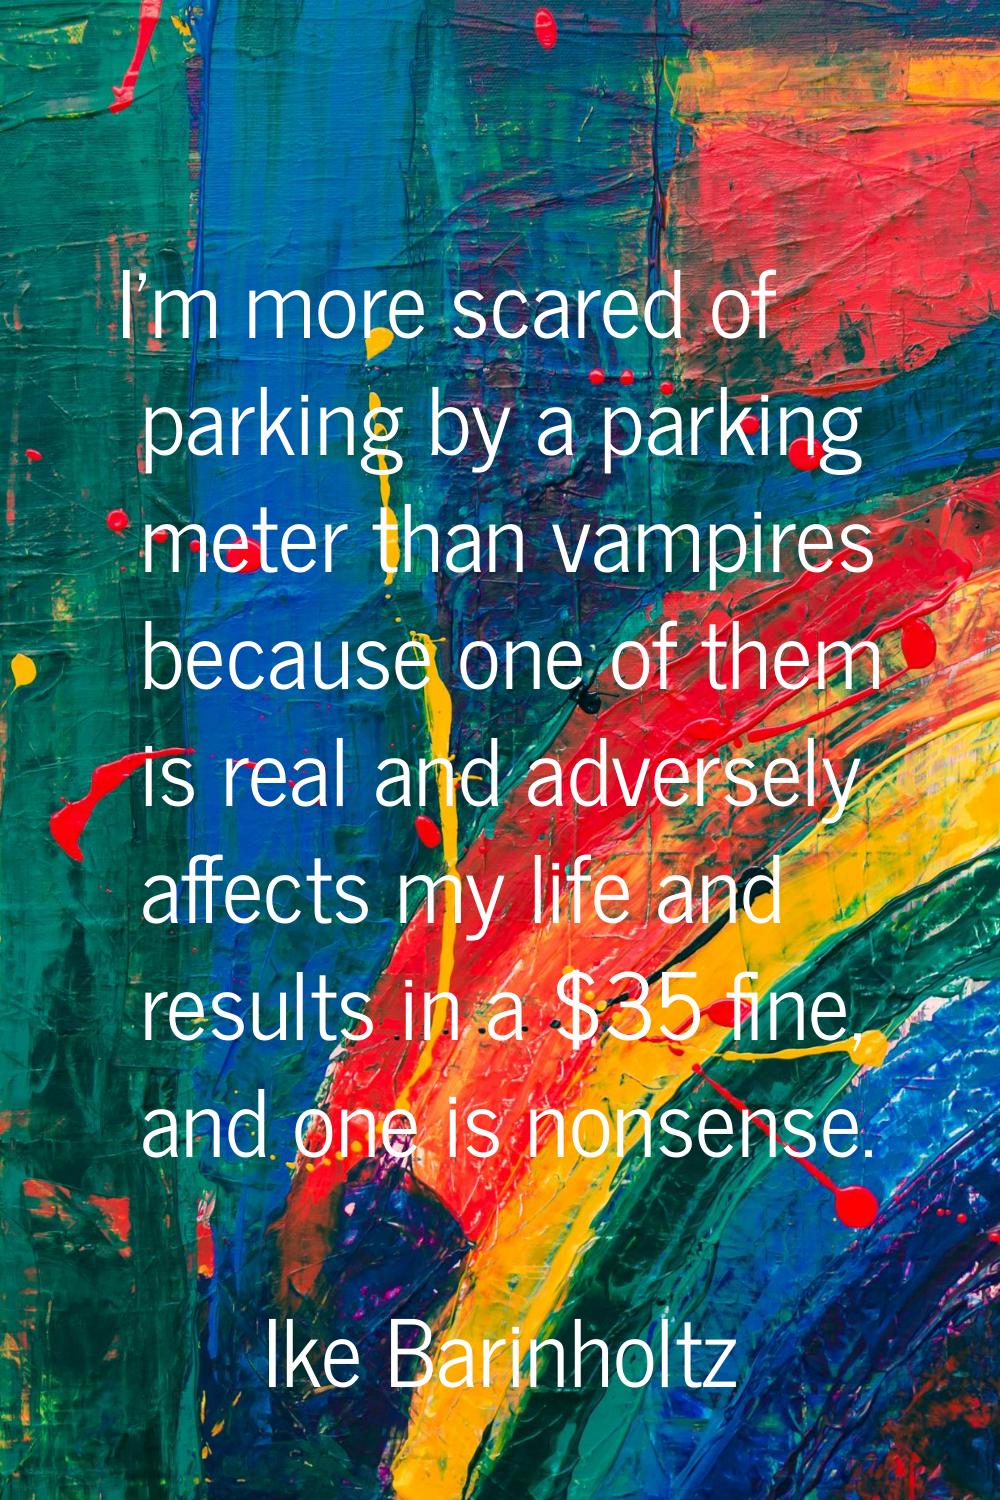 I'm more scared of parking by a parking meter than vampires because one of them is real and adverse